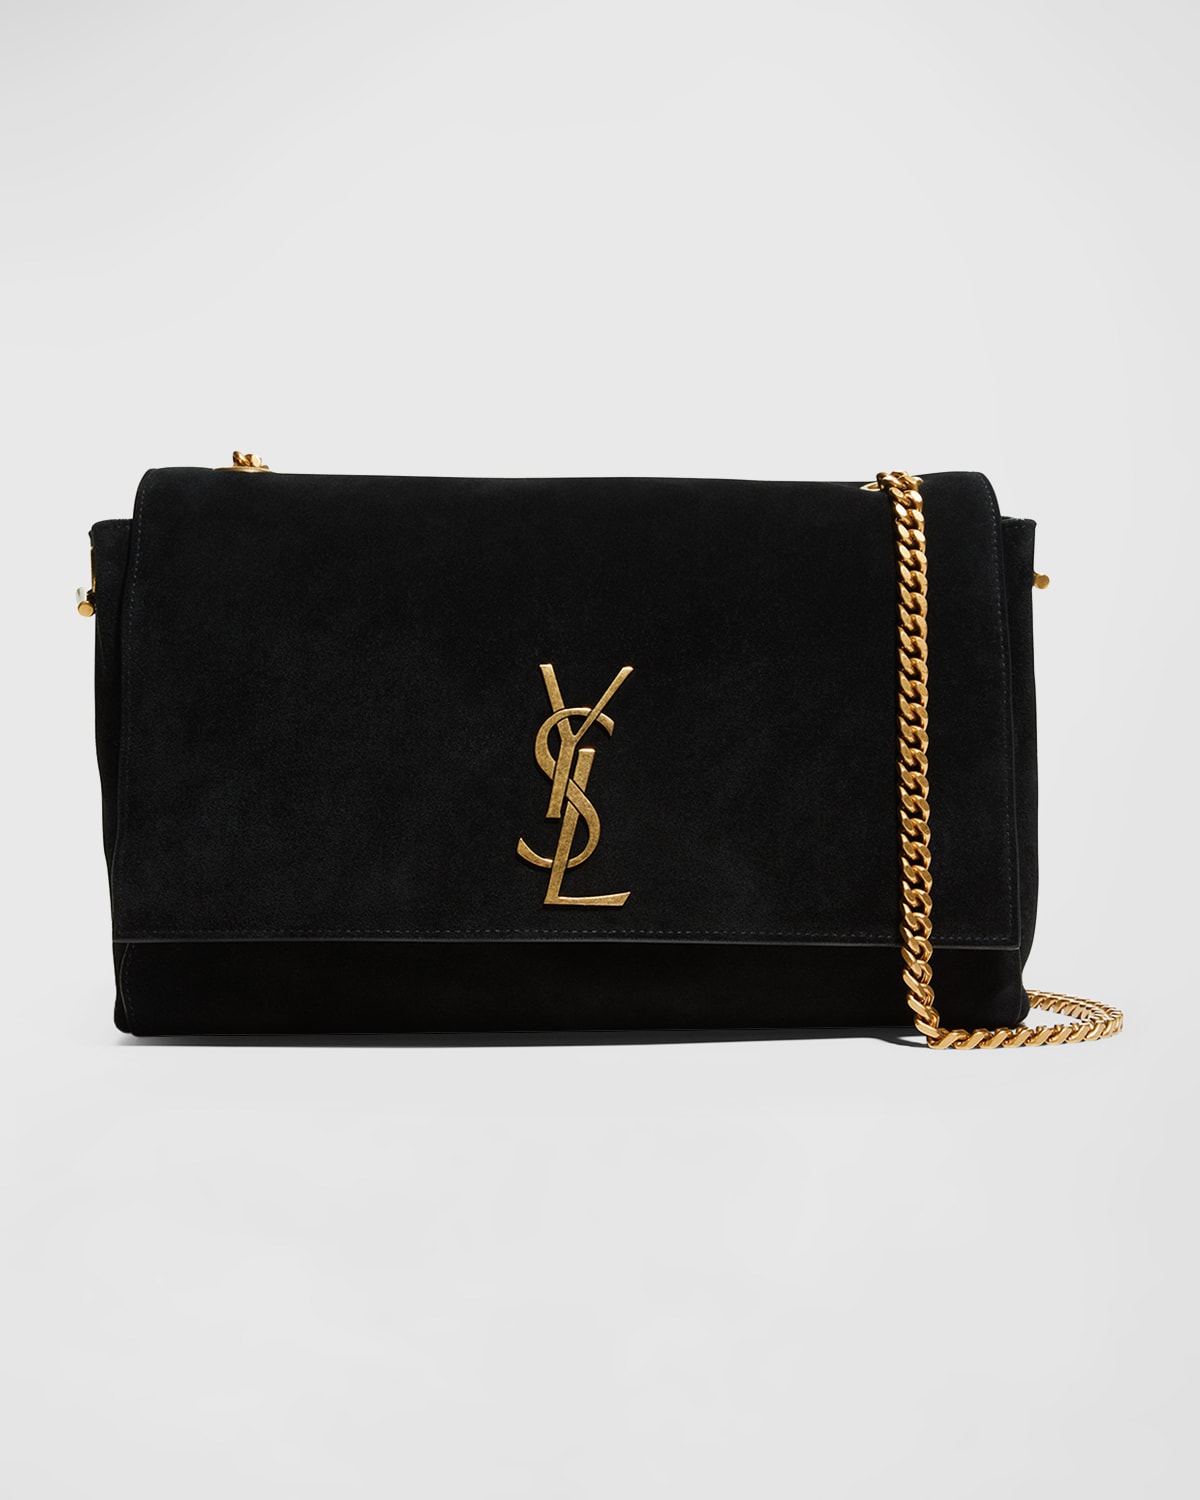 SAINT LAURENT KATE MEDIUM REVERSIBLE YSL CROSSBODY BAG IN SUEDE AND SMOOTH LEATHER